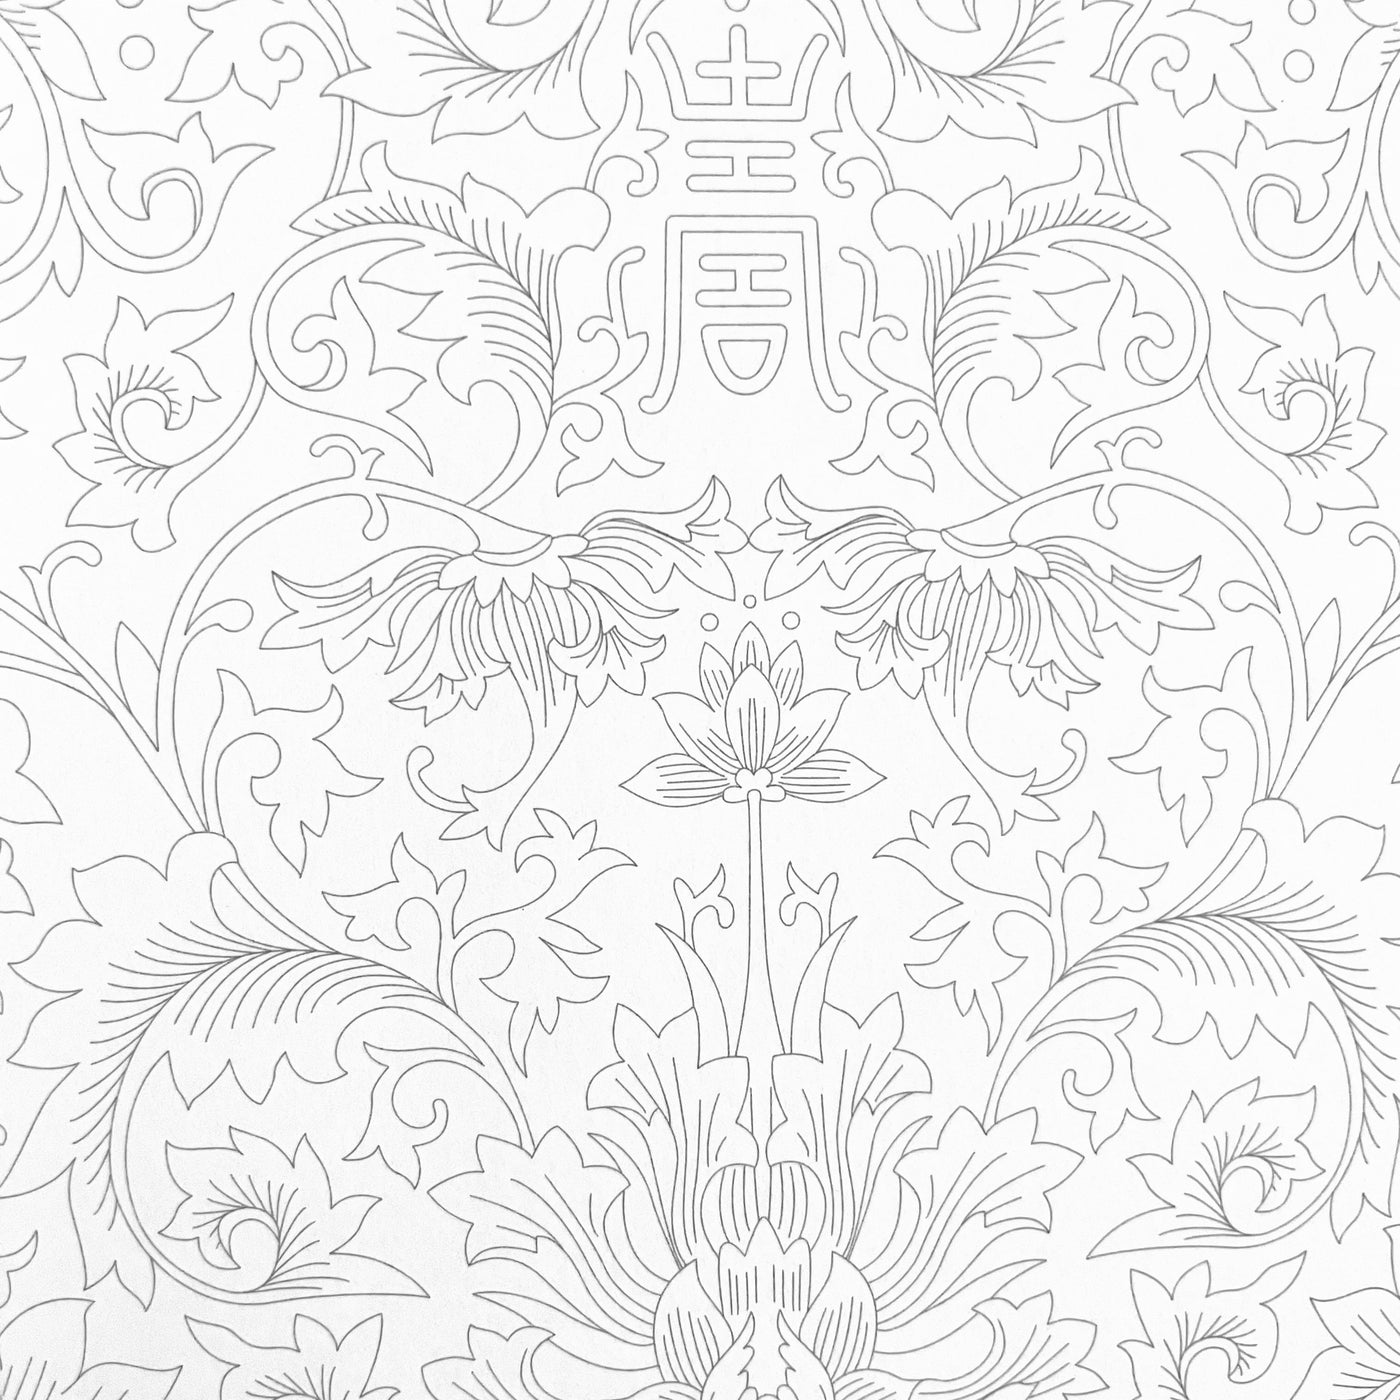 Pepin Postcard Coloring Books - Chinese Designs